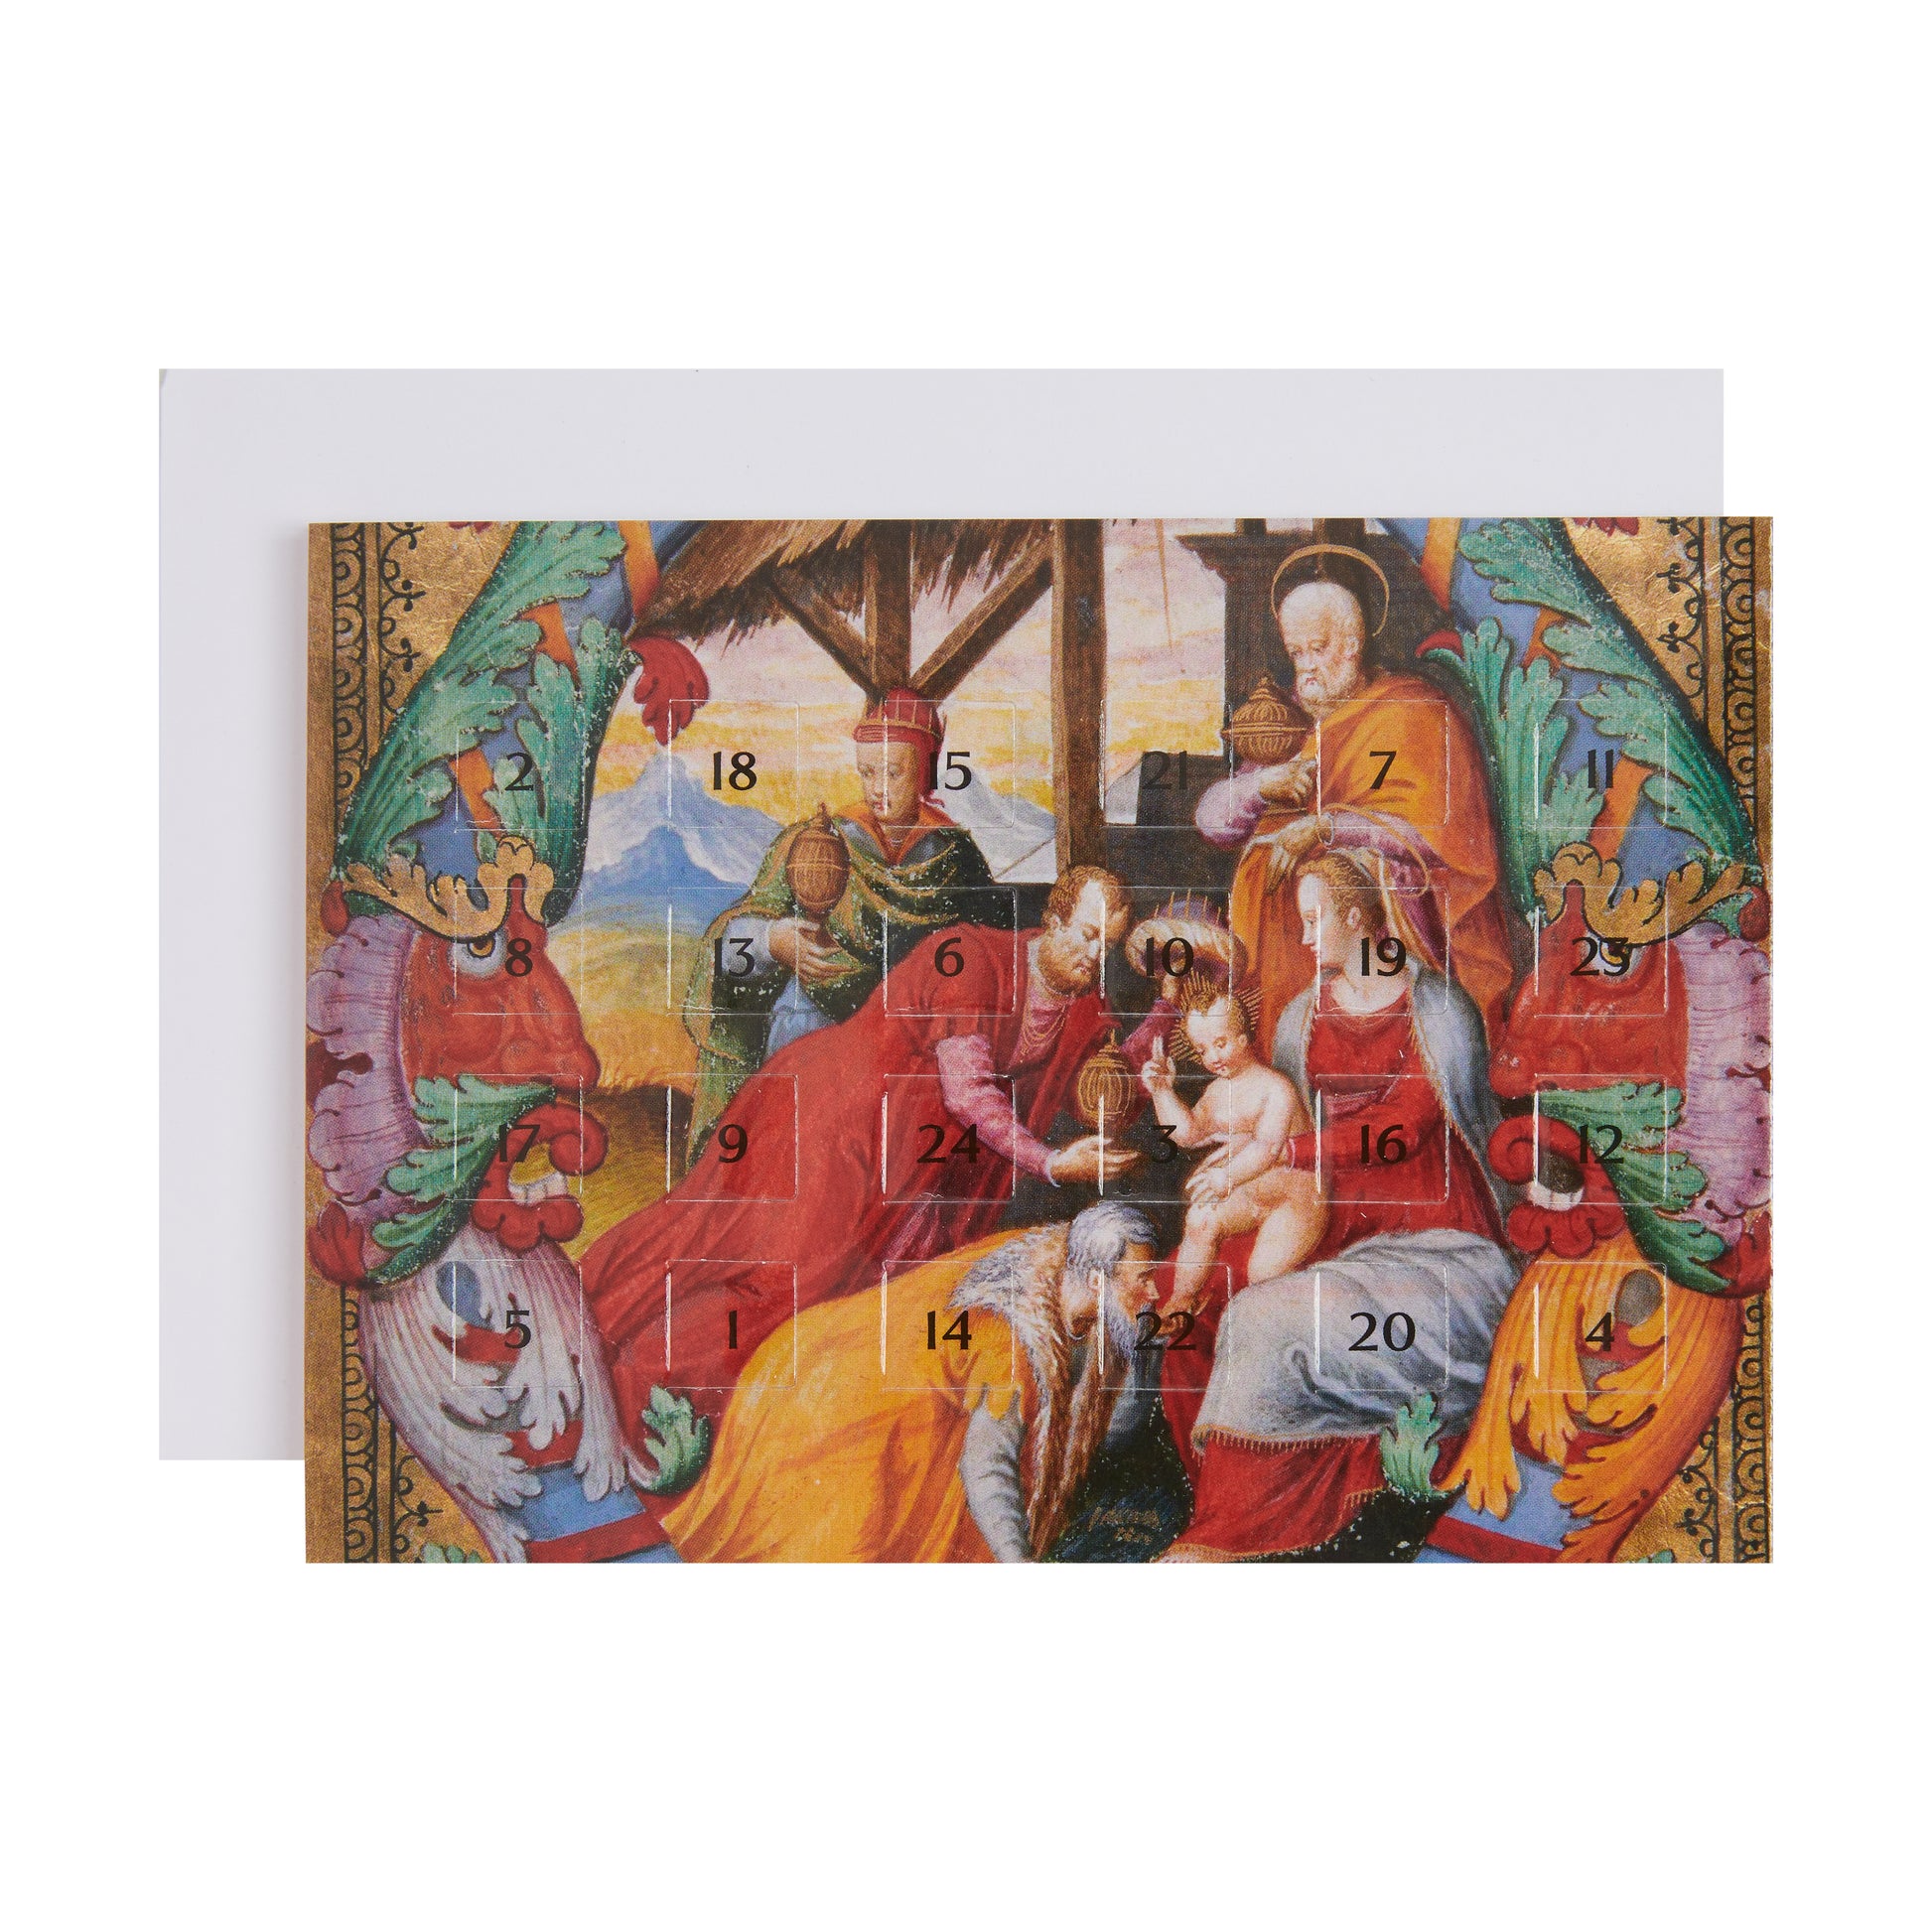 Advent card with envelope - Adoration of the Magi scene from an illuminated manuscript. From the collection of the Fitzwilliam Museum.